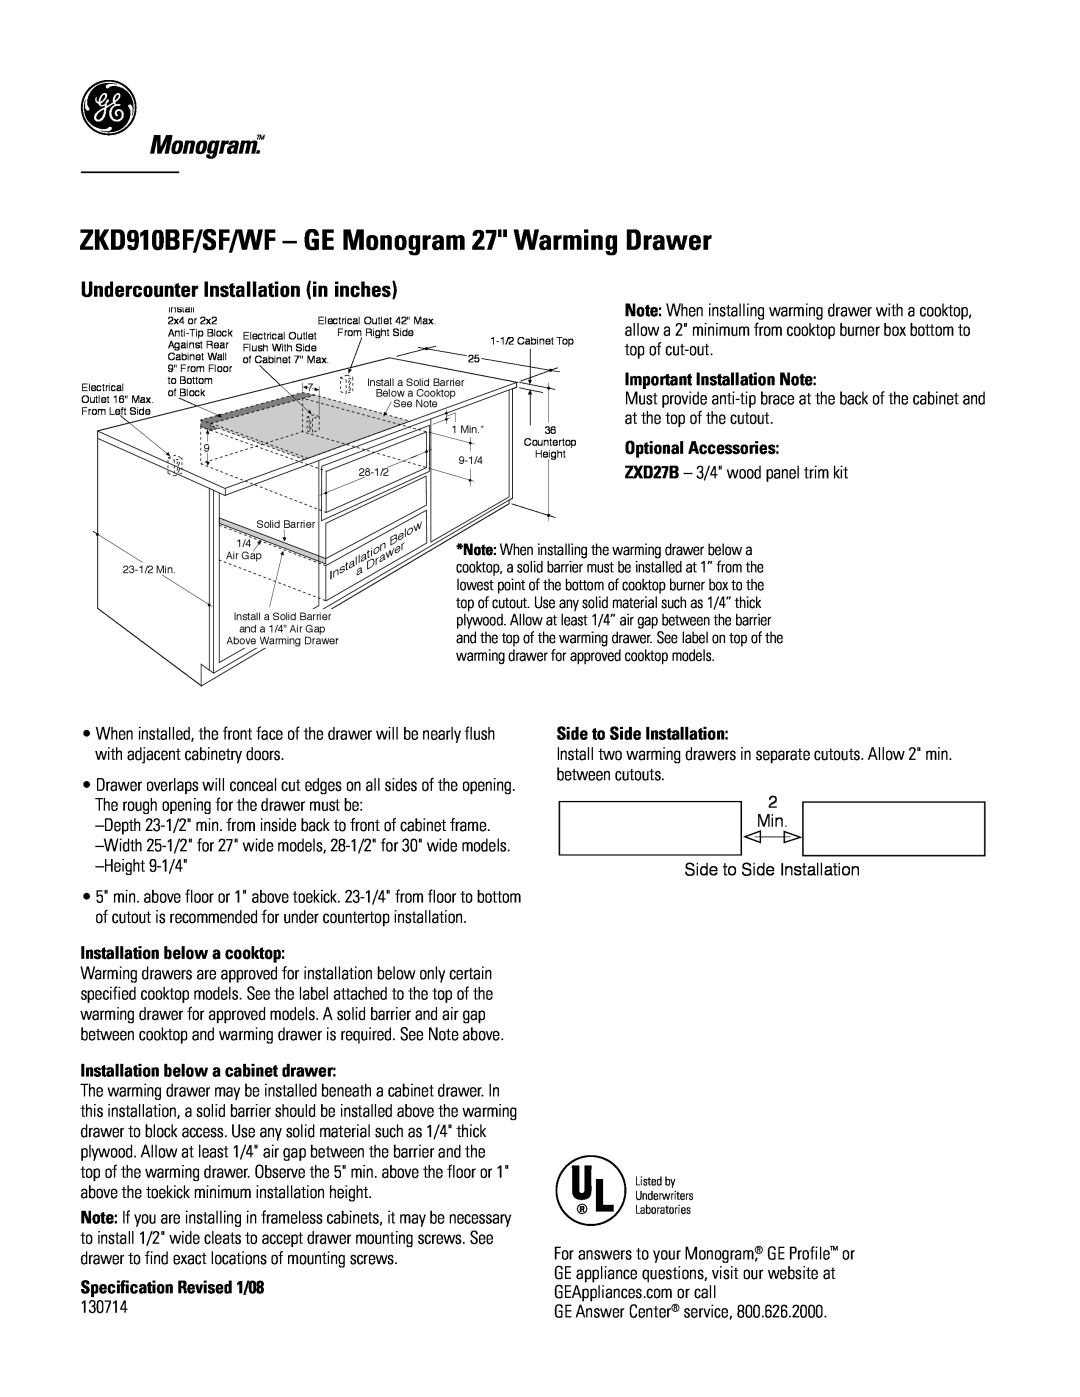 GE ZKD910BF/SF/WF - GE Monogram 27 Warming Drawer, Undercounter Installation in inches, Important Installation Note 